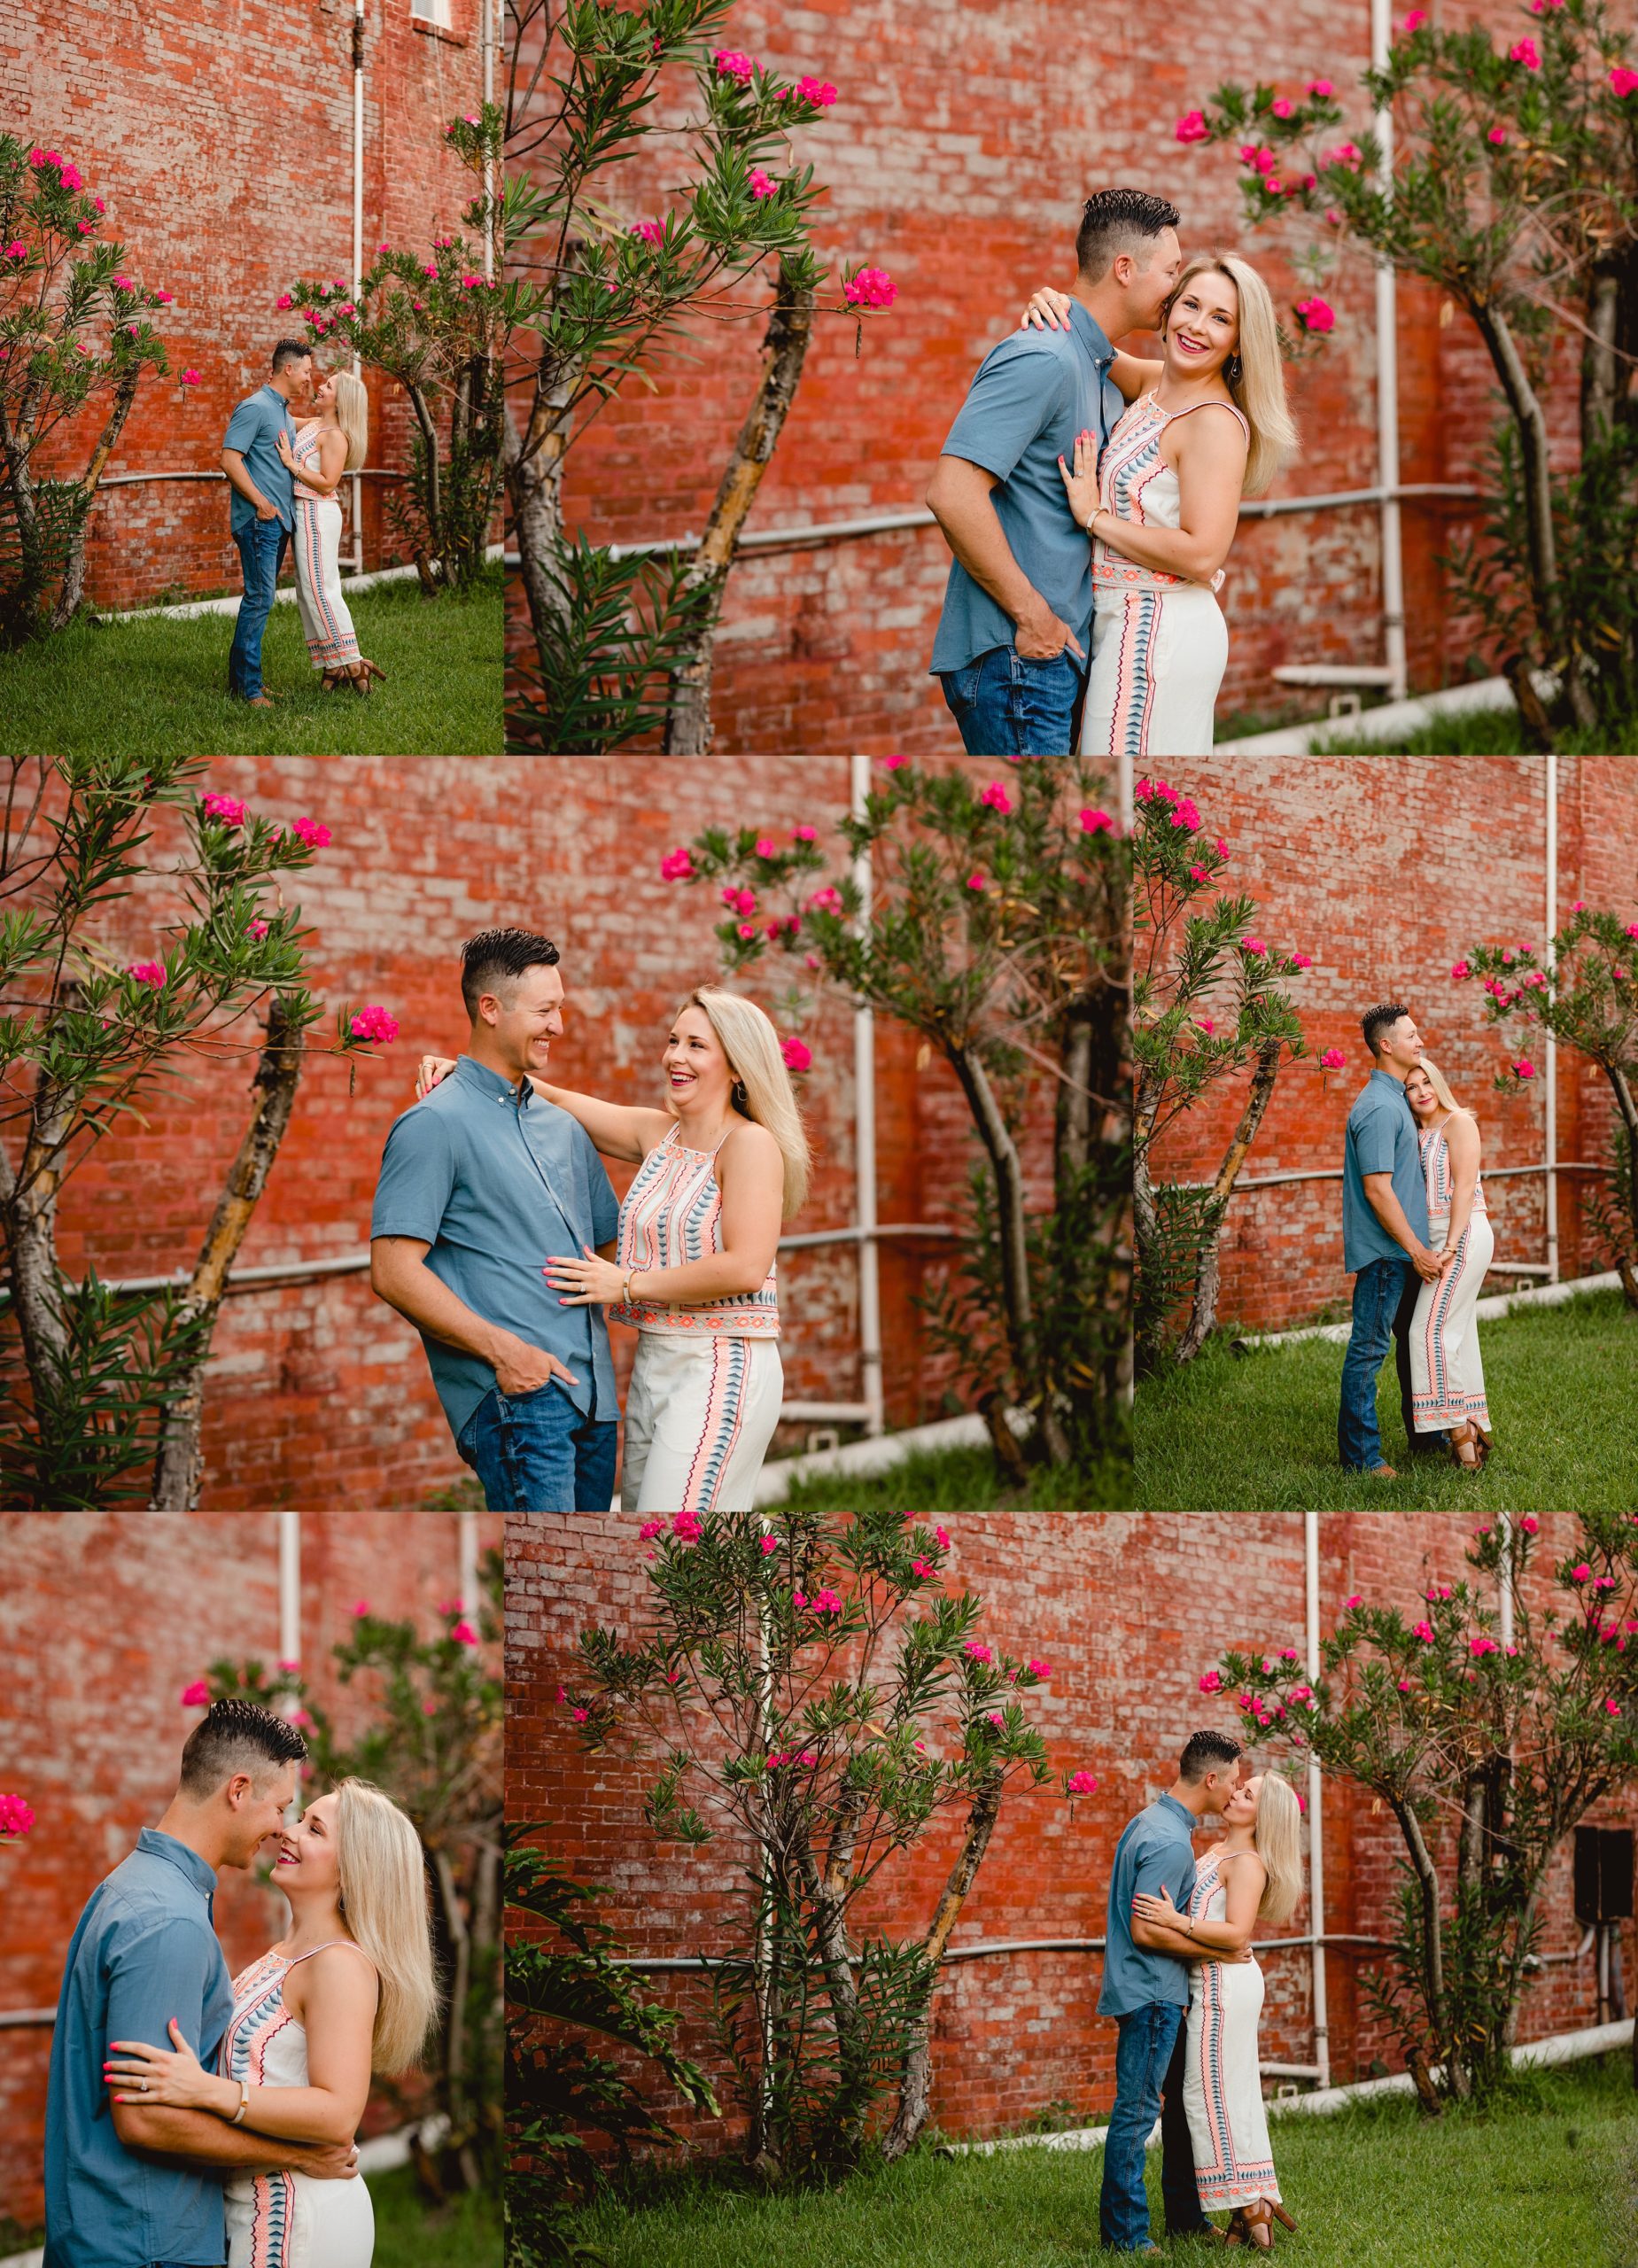 Couples poses ideas for engagement photoshoot